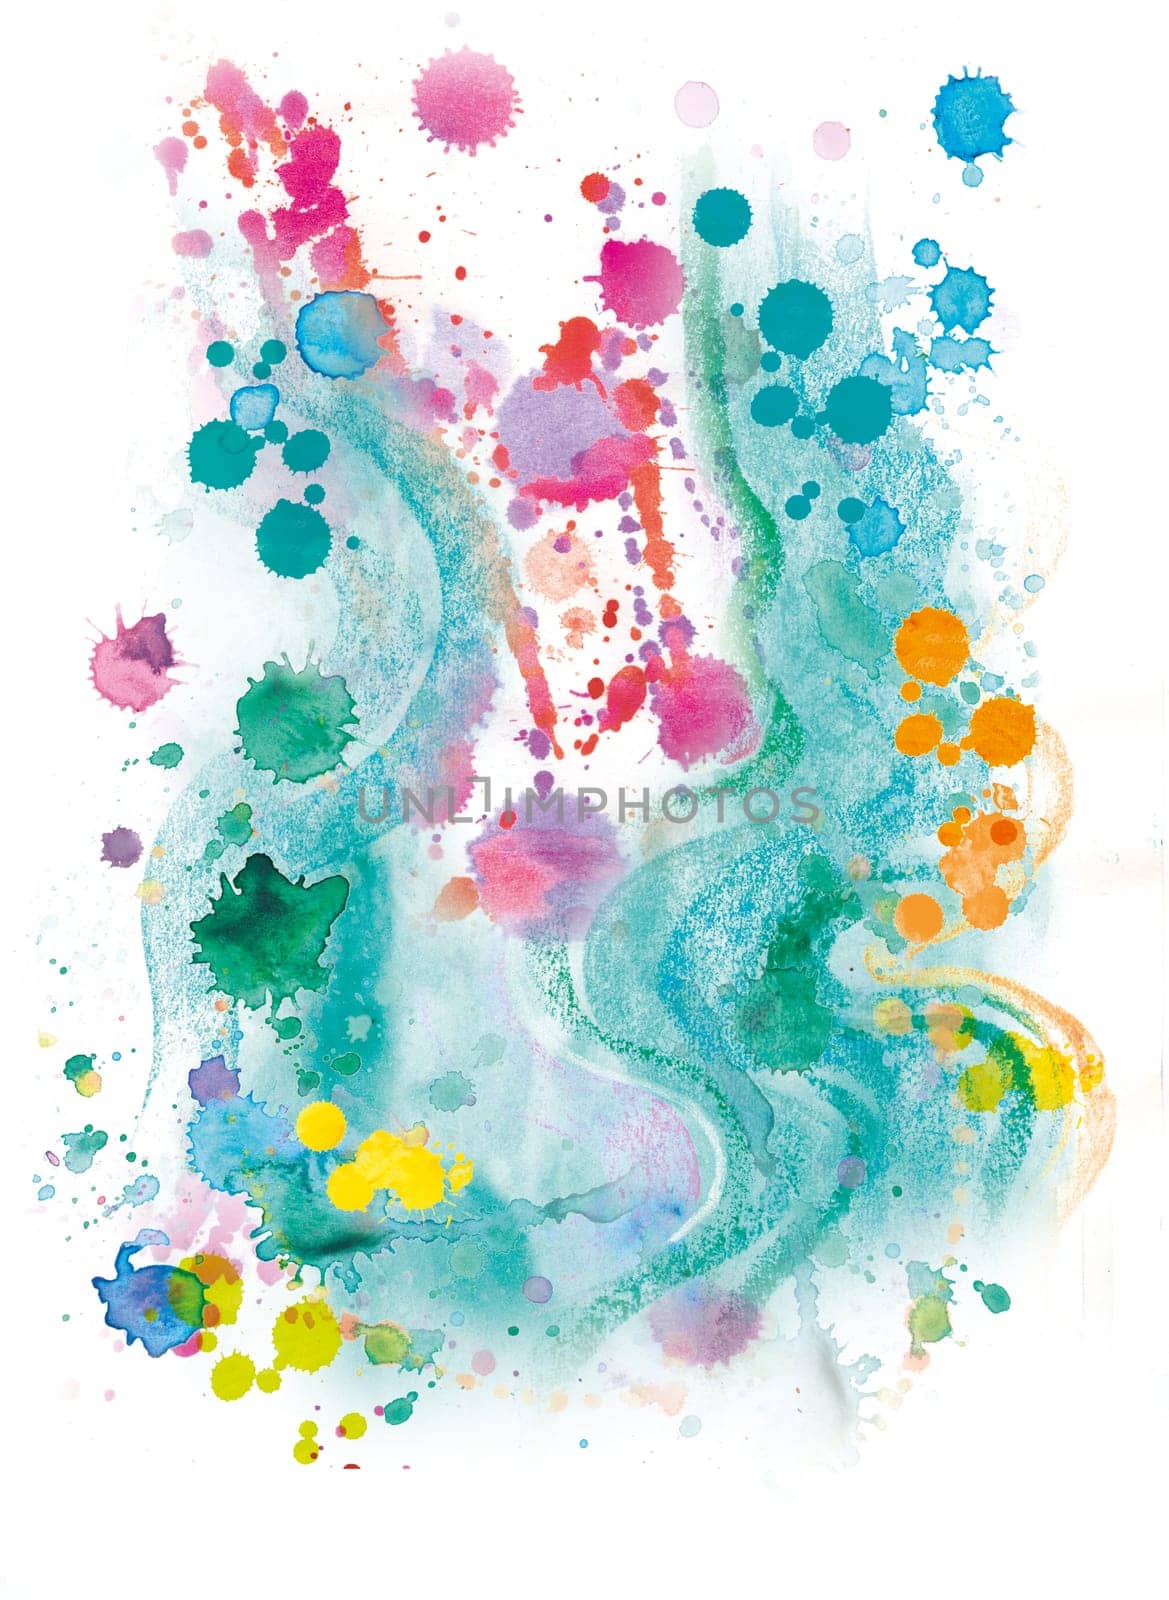 Drops and blots together with watercolor and gouache monotypes isolated on a white background for design and creating art effects